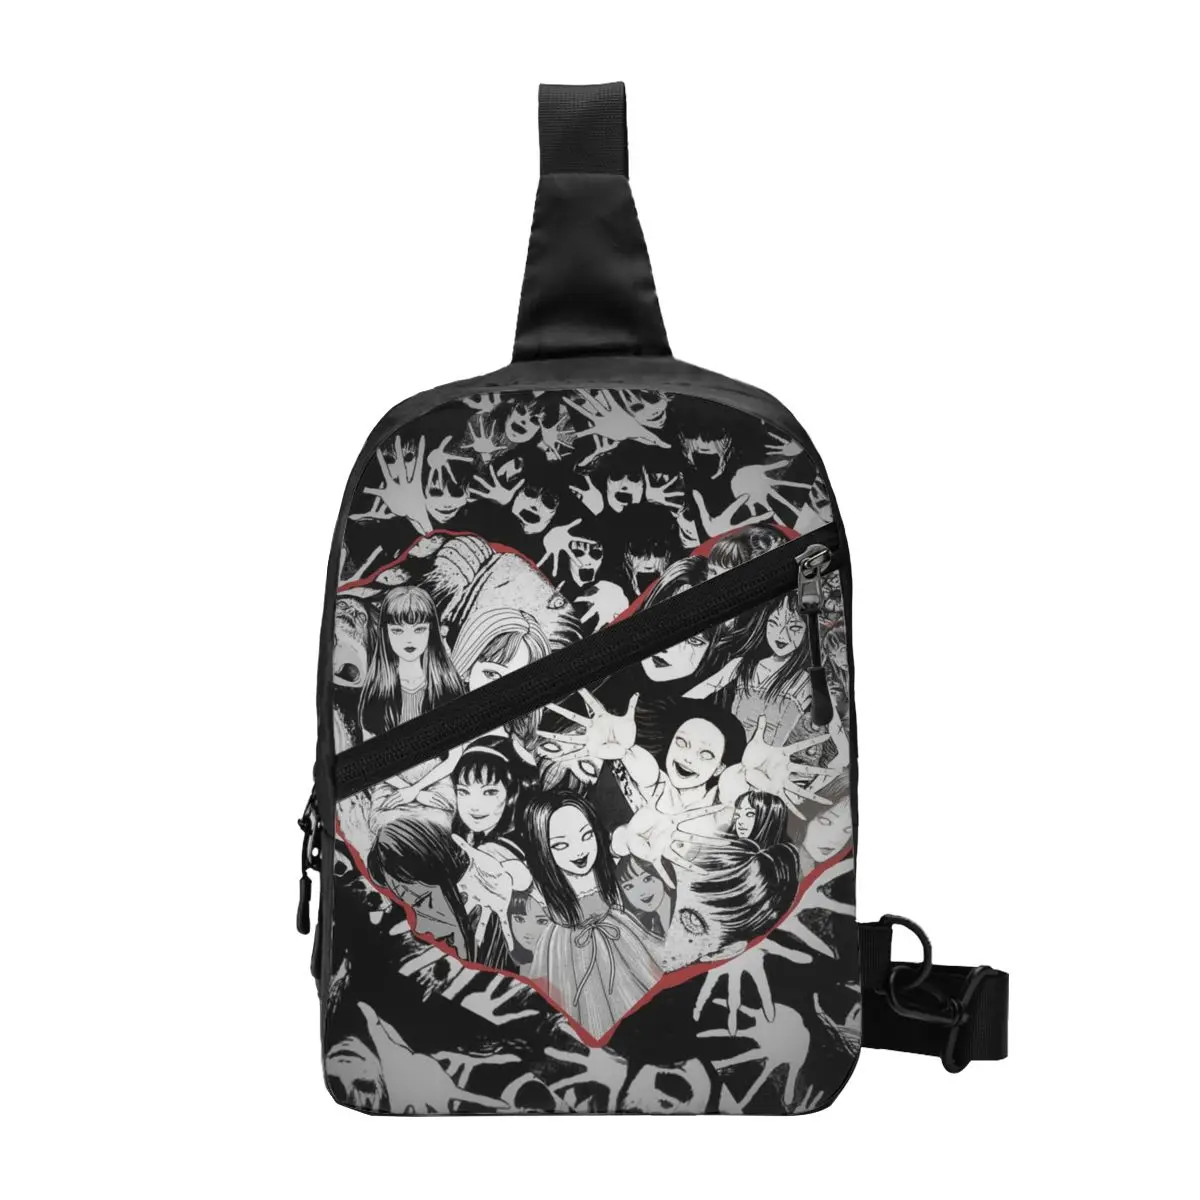 

Junji Ito Tomie Valentines Day Shoulder Bag Male Horror Manga Business Chest Bags Funny Sports Motorcycle Sling Bag